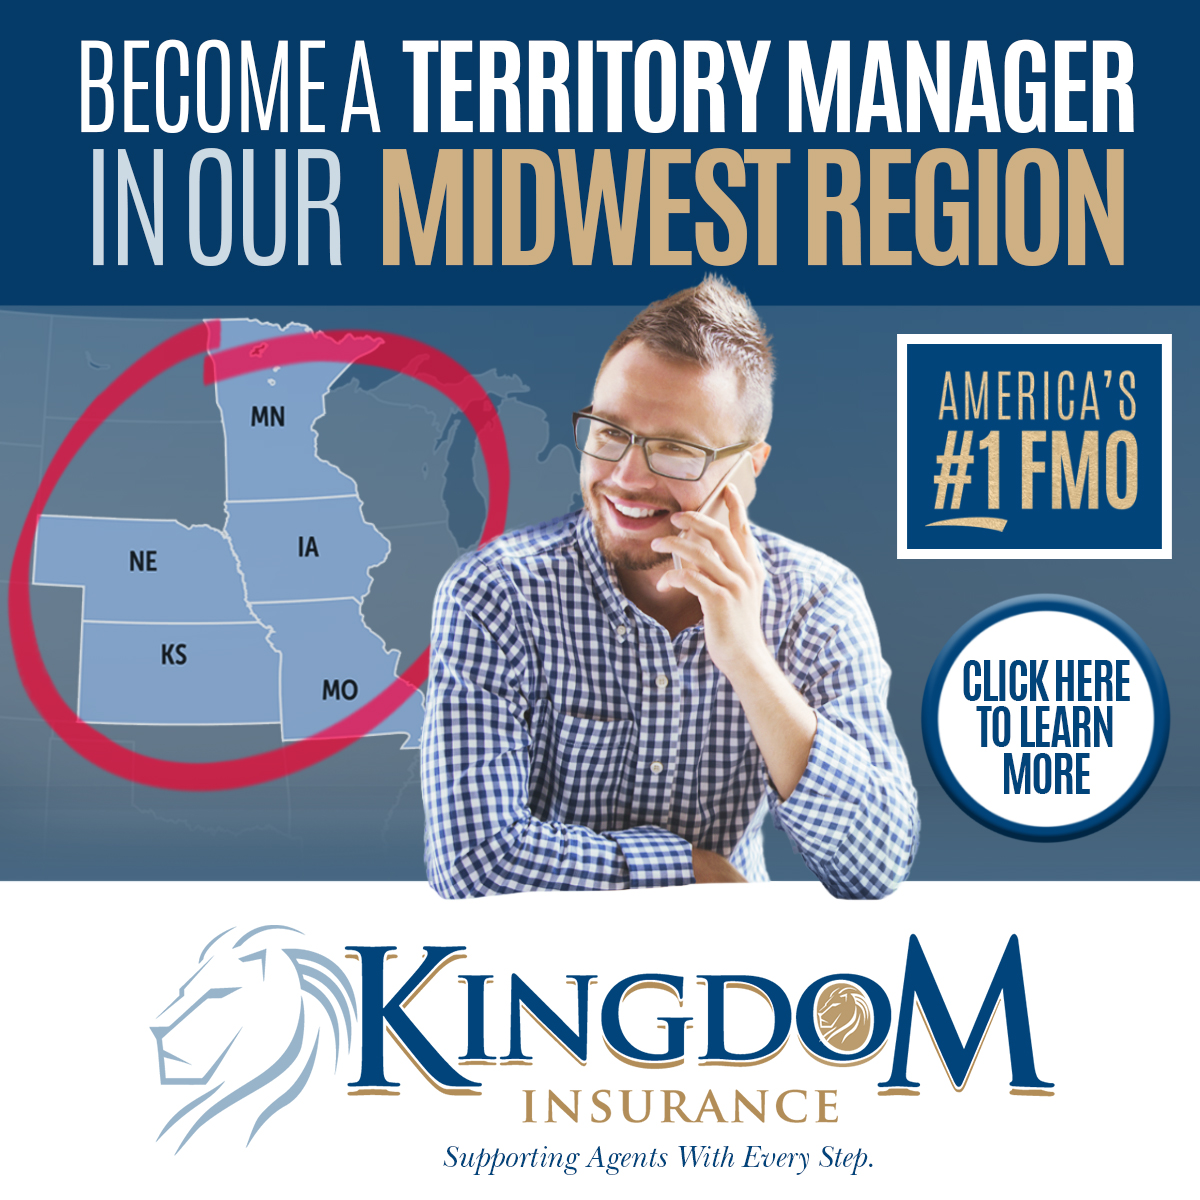 Become a Territory Manager in out Midwest Region. American's #1 FMO. Click here to learn more. Kingdom Insurance. Supporting agents with every step.